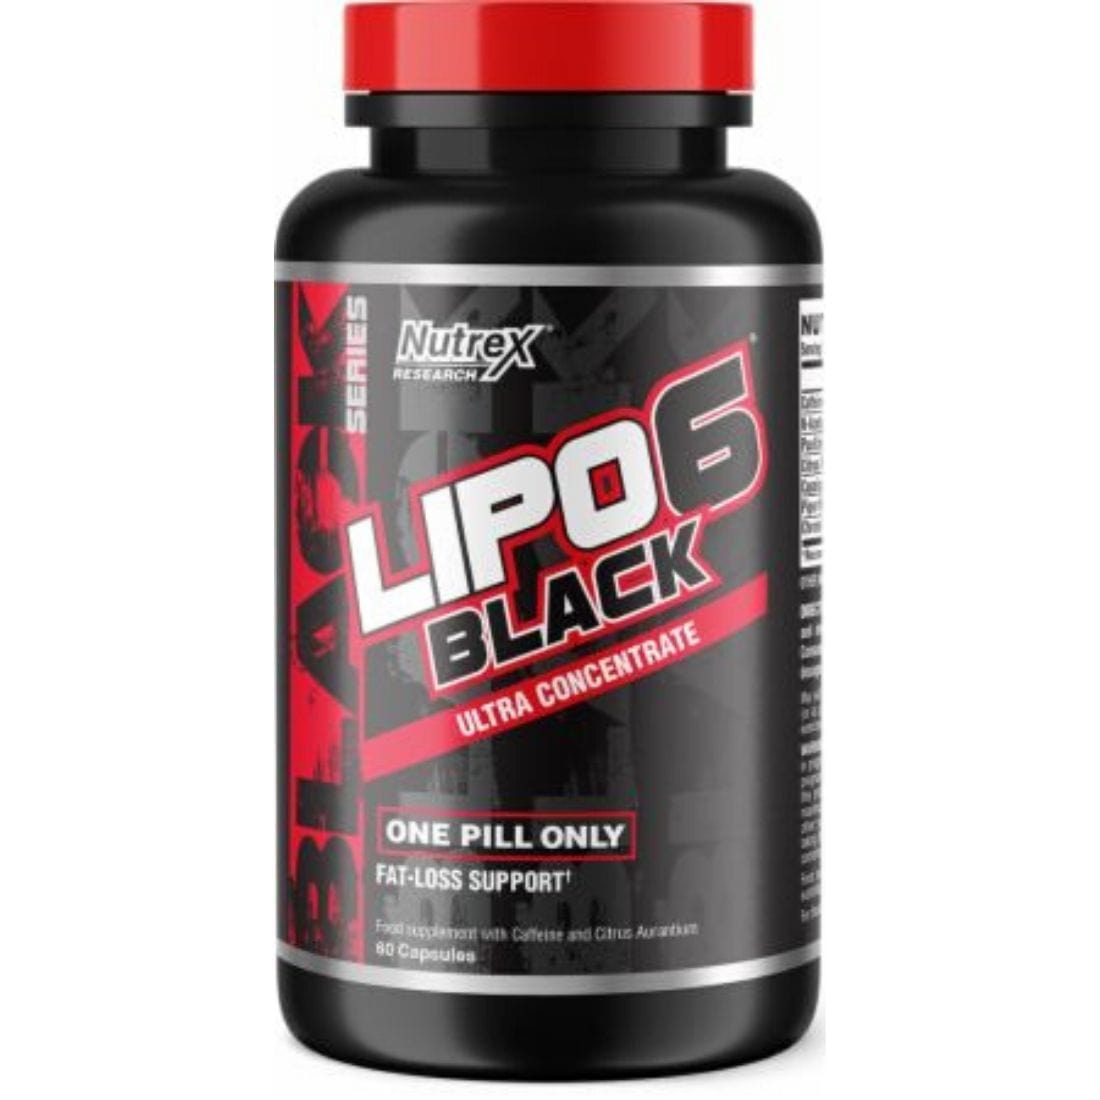 Nutrex Research Lipo 6 Black (Ultra Concetrate) (New!)